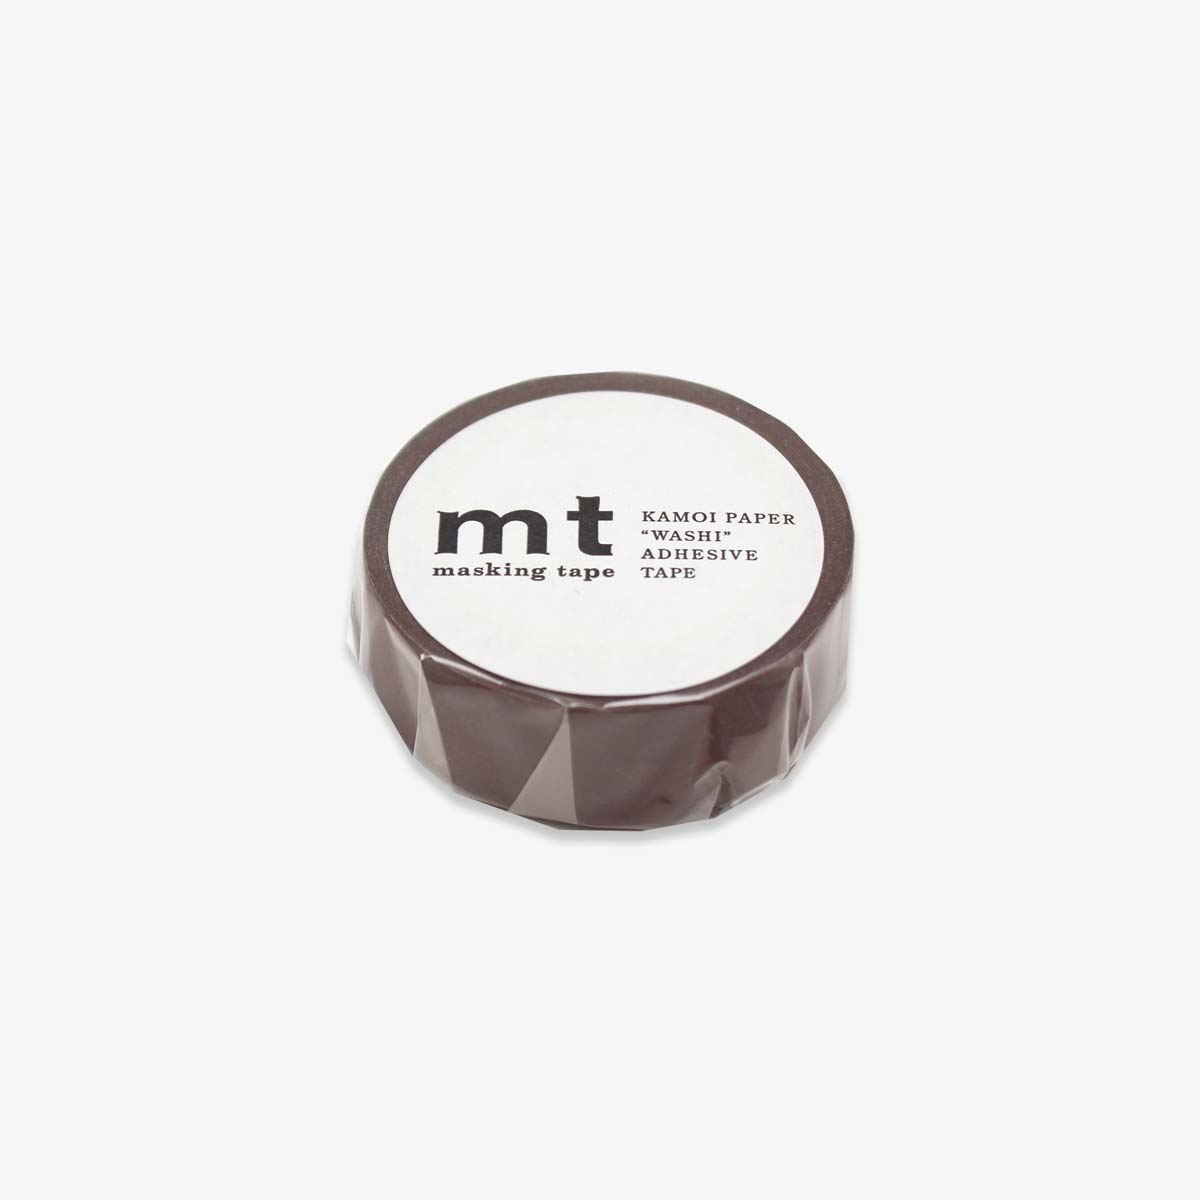 Kip 307 Masking Tape Blue (click here for the size)